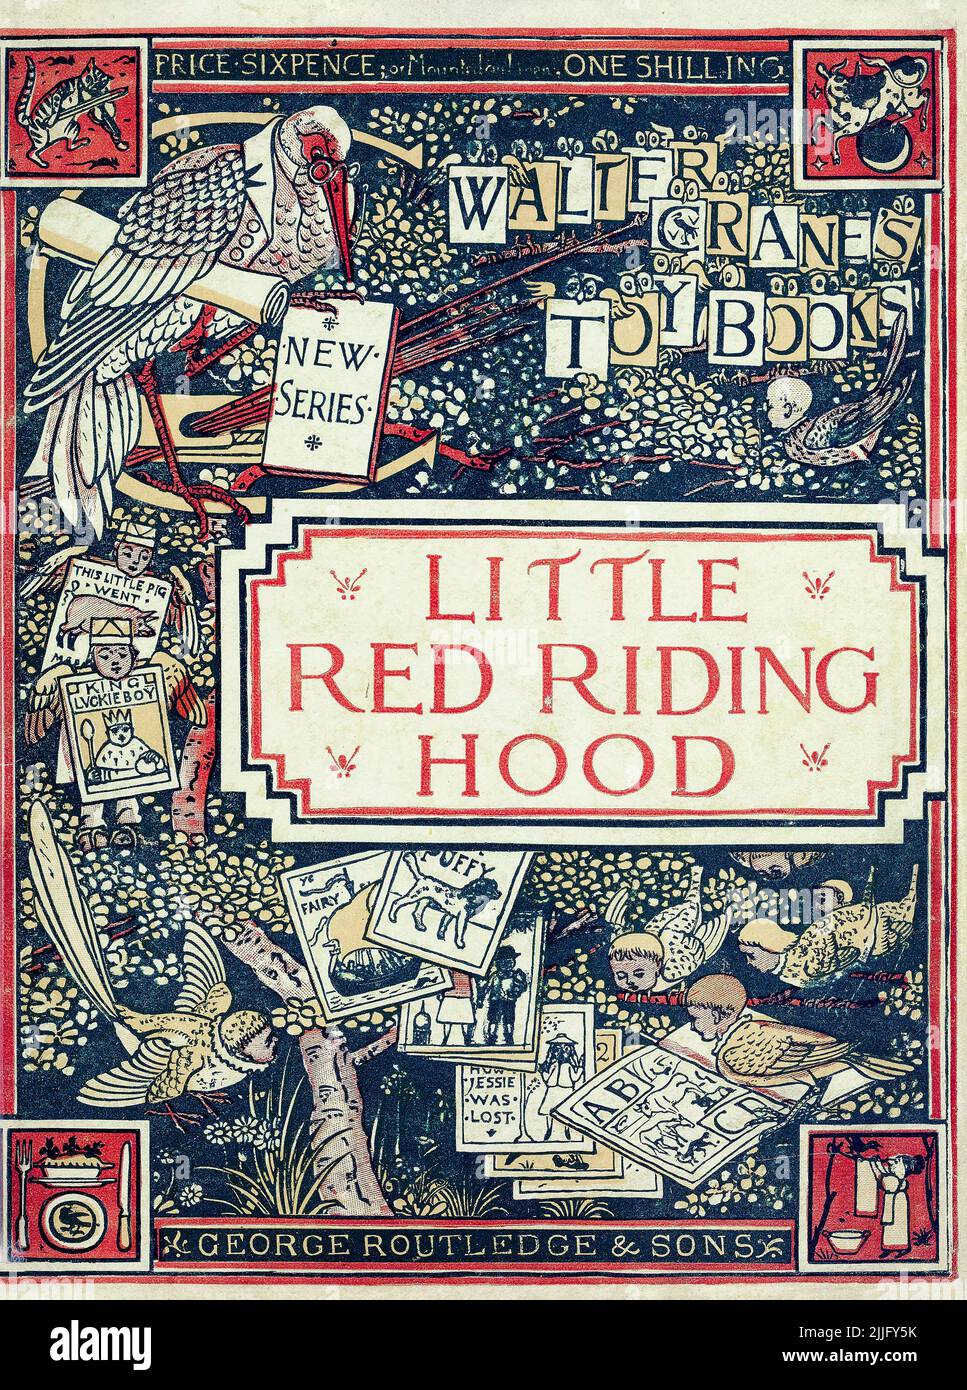 Little Red Riding Hood, illustrated children's book, cover design illustration by Walter Crane, 1876 Stock Photo